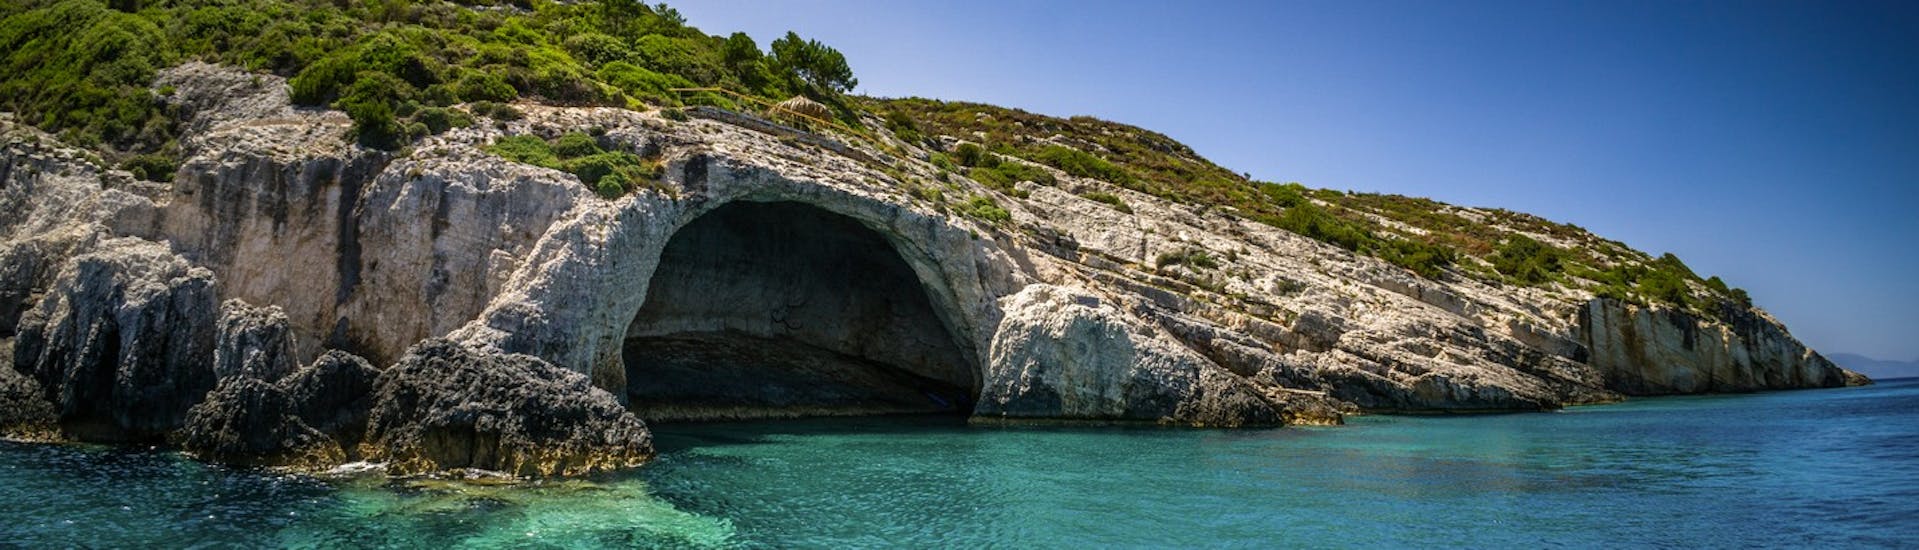 The Blue Caves that My Tours visits in their boat trip around Zakynthos.